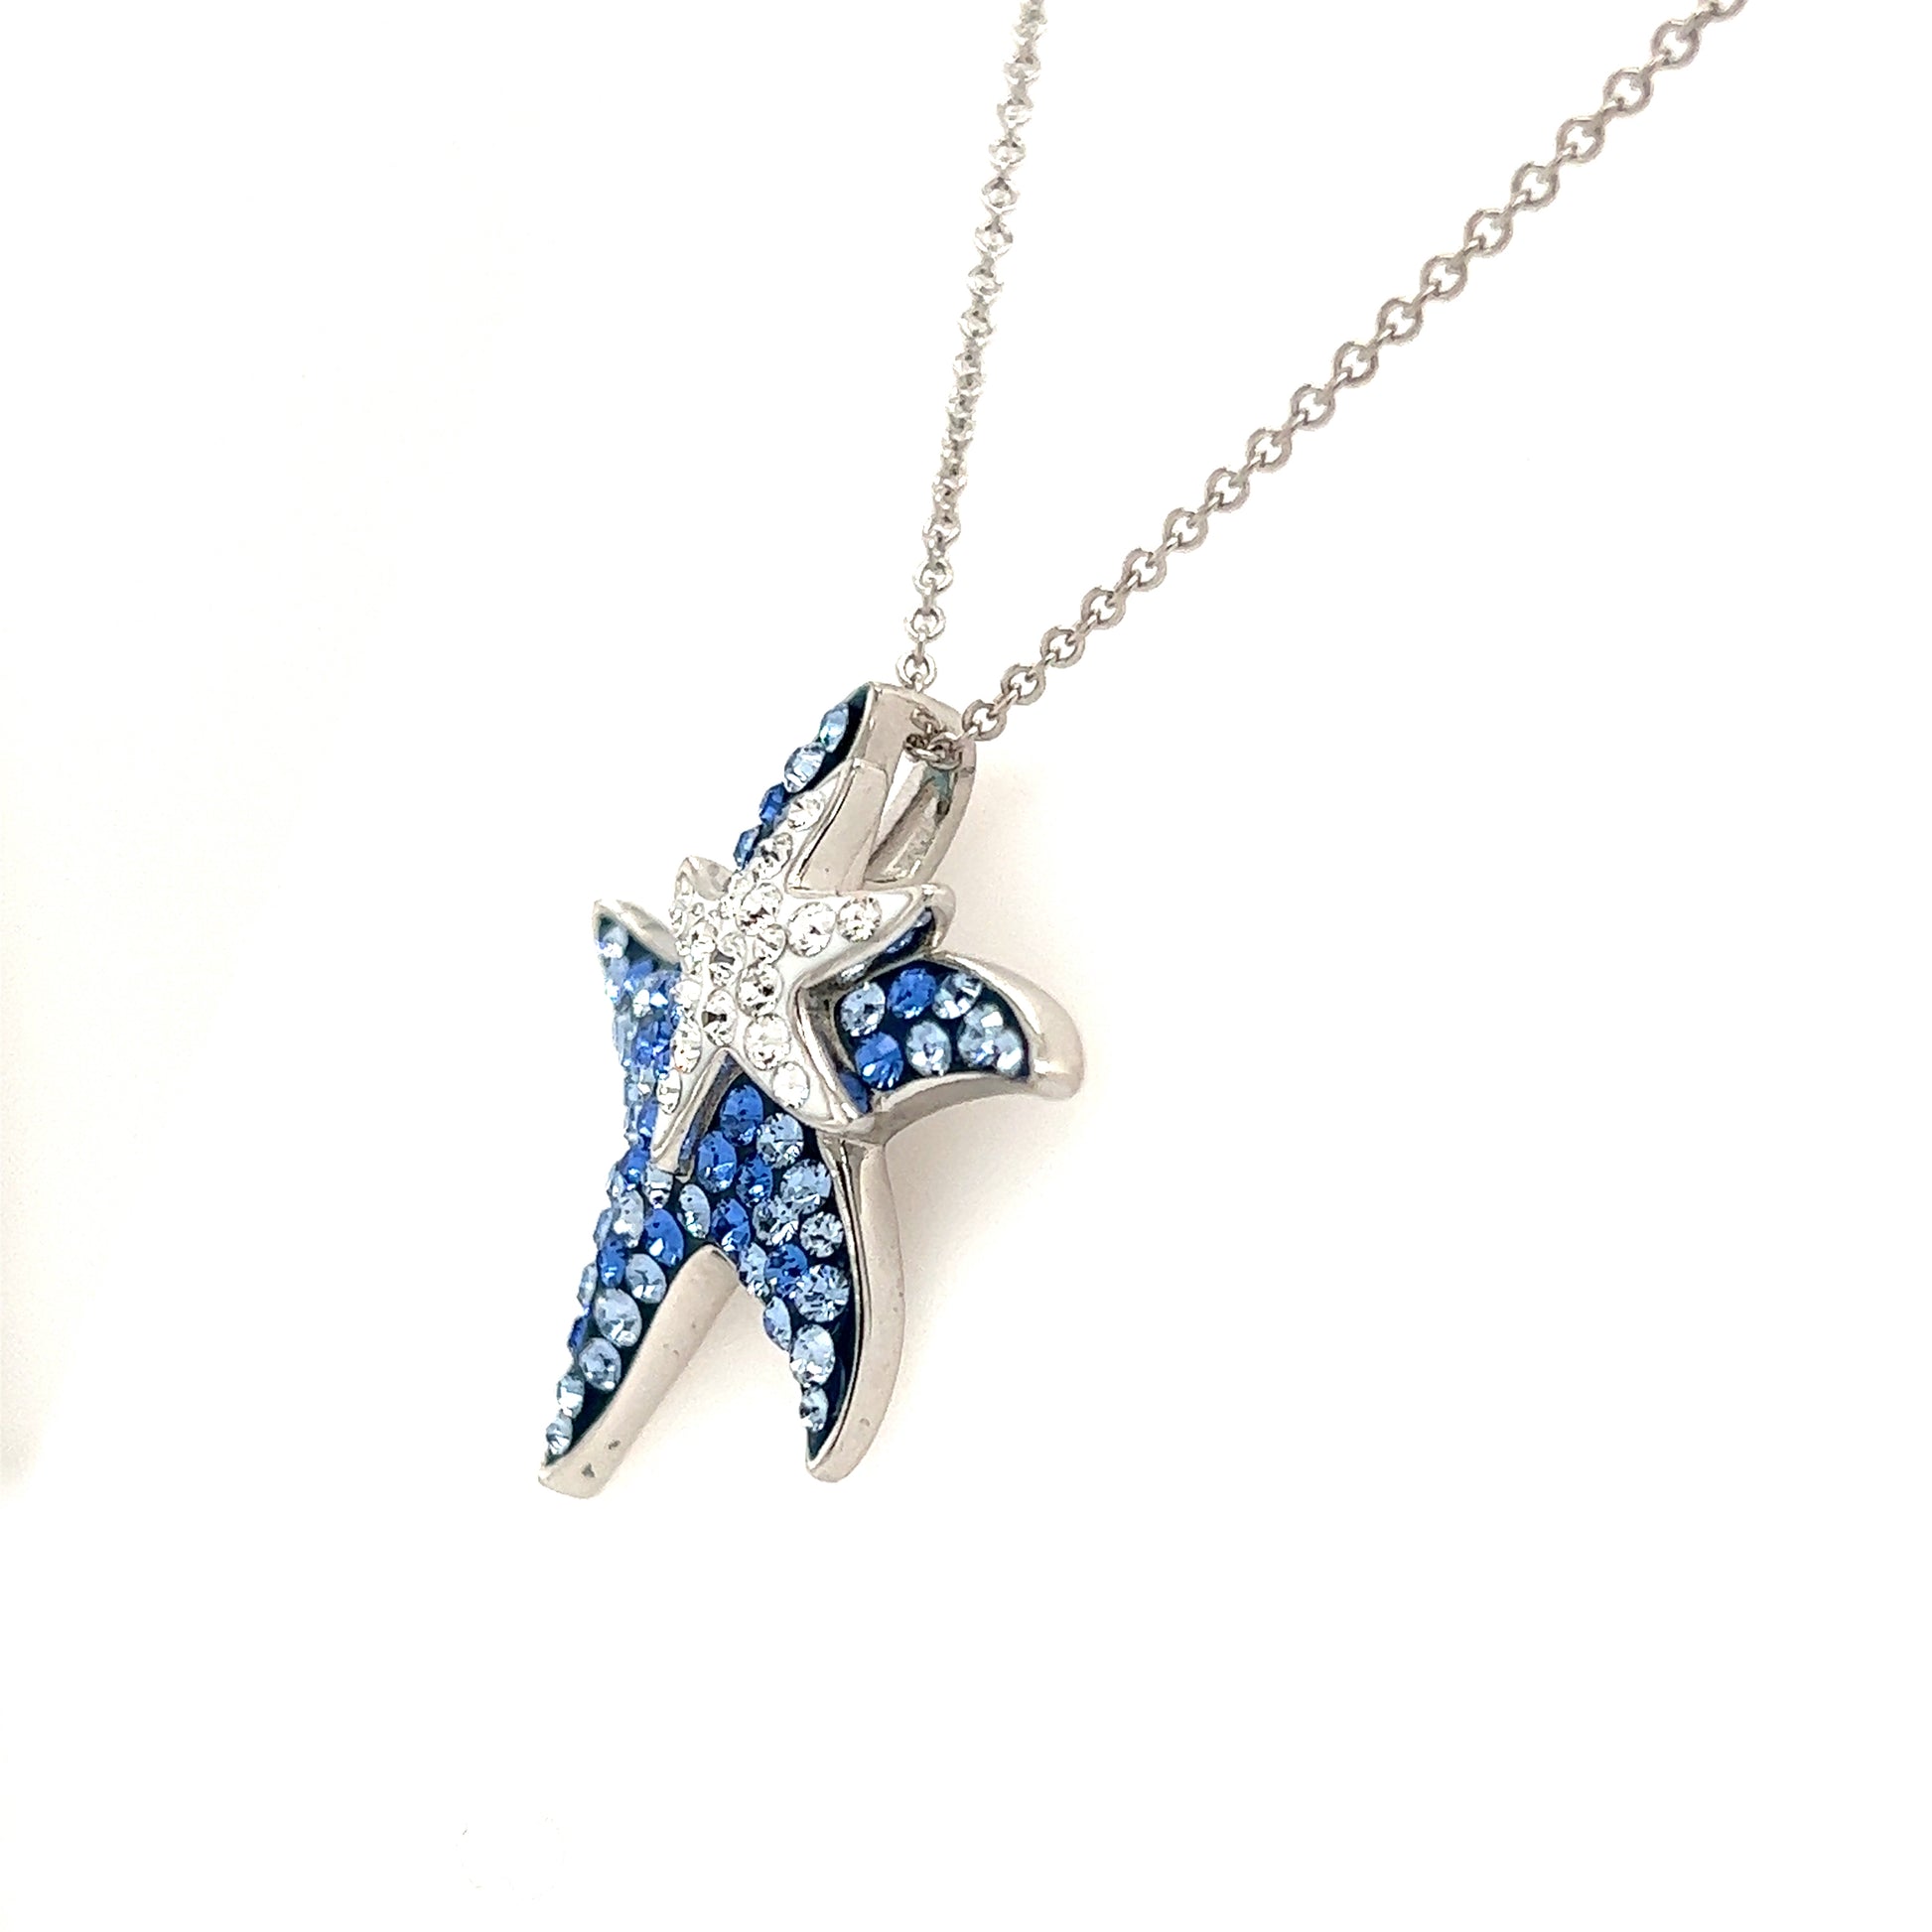 Blue Starfish Necklace with White and Blue Crystals in Sterling Silver. Left Side View